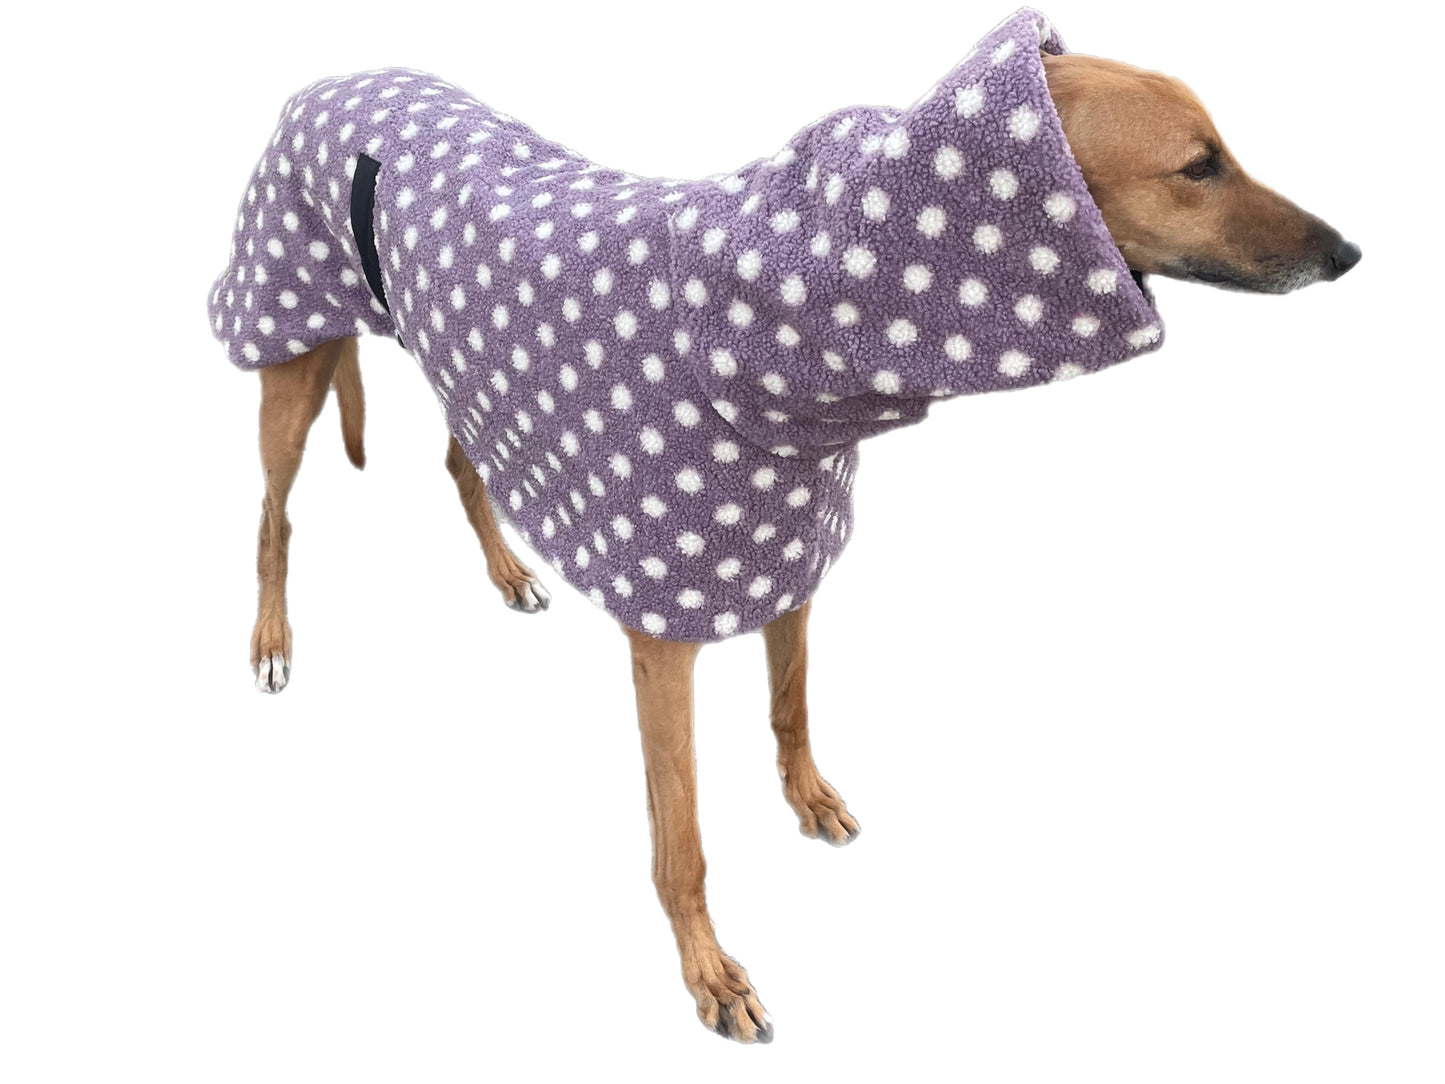 Violet Polka dot print Teddy fleece deluxe style greyhound coat with snuggly wide neck roll